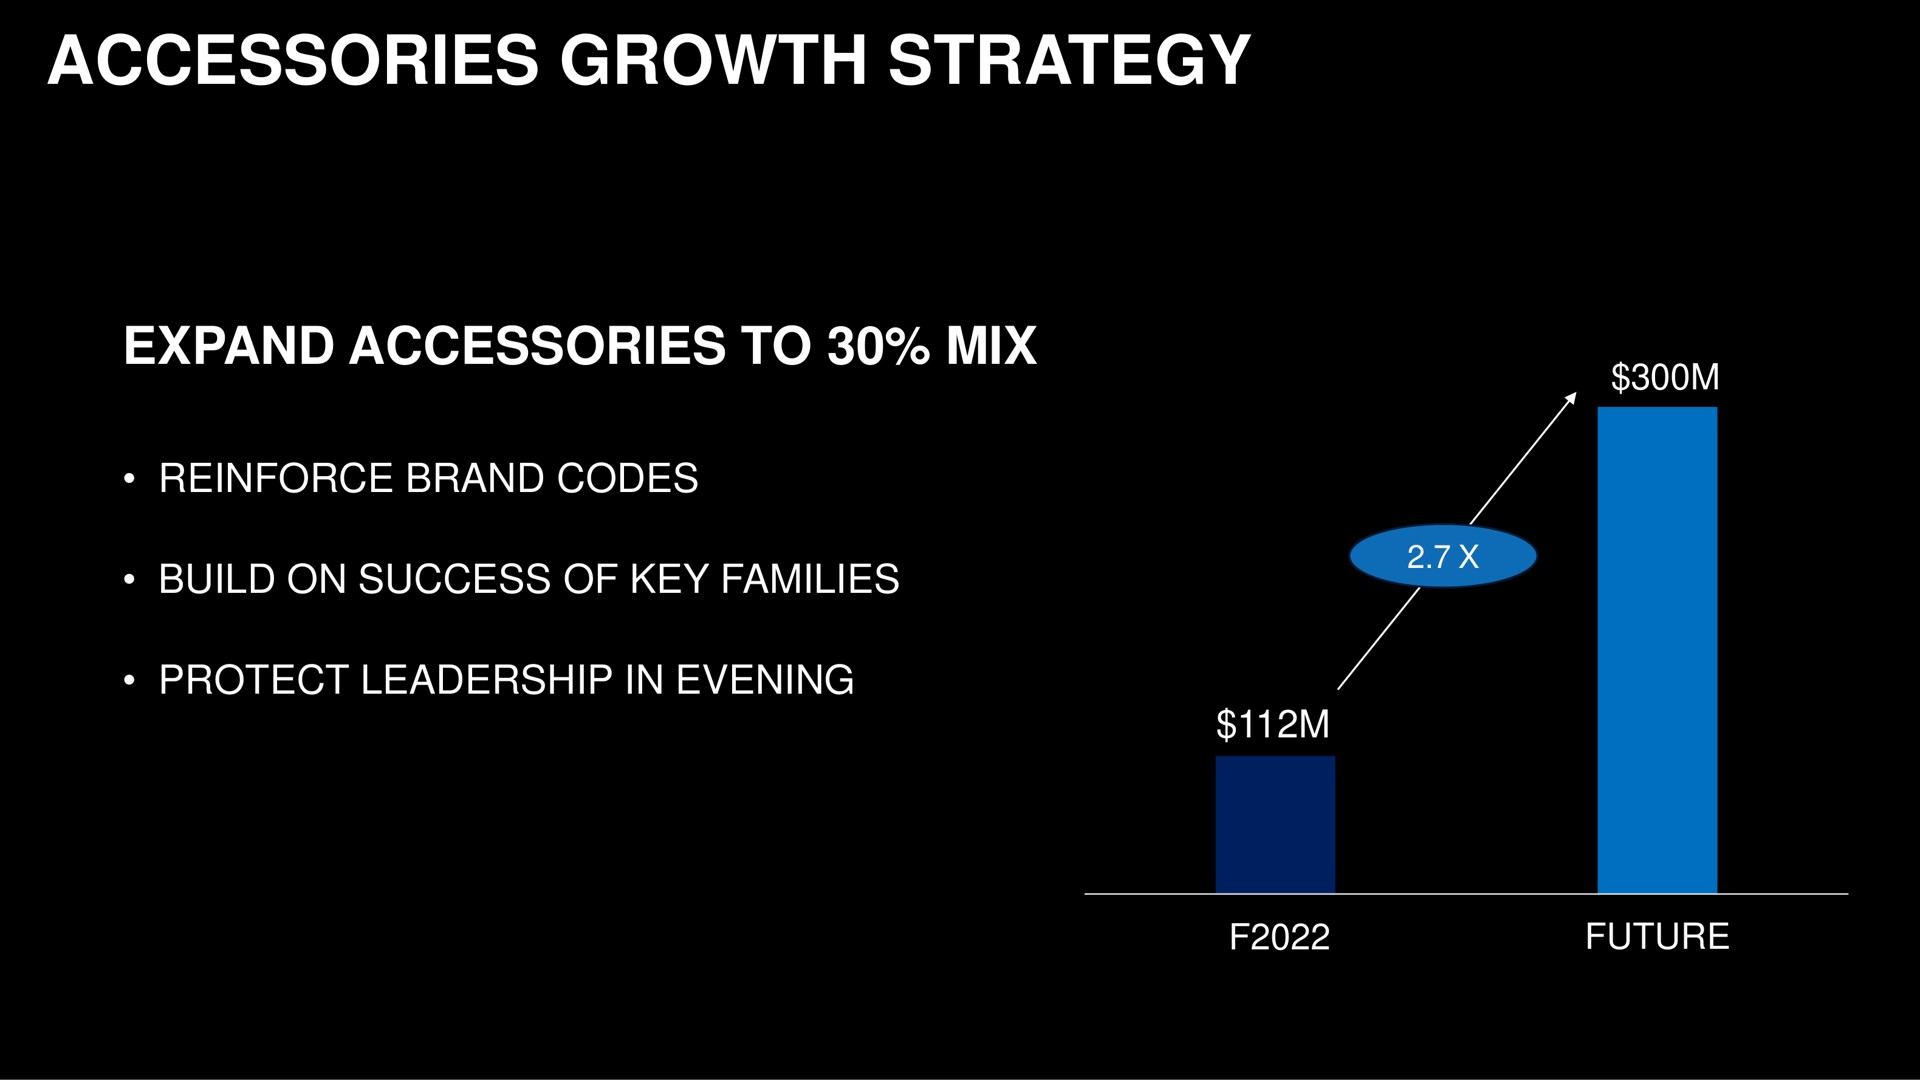 accessories growth strategy expand to mix ree reinforce brand codes build on success of key families alts protect leadership in evening future | Capri Holdings